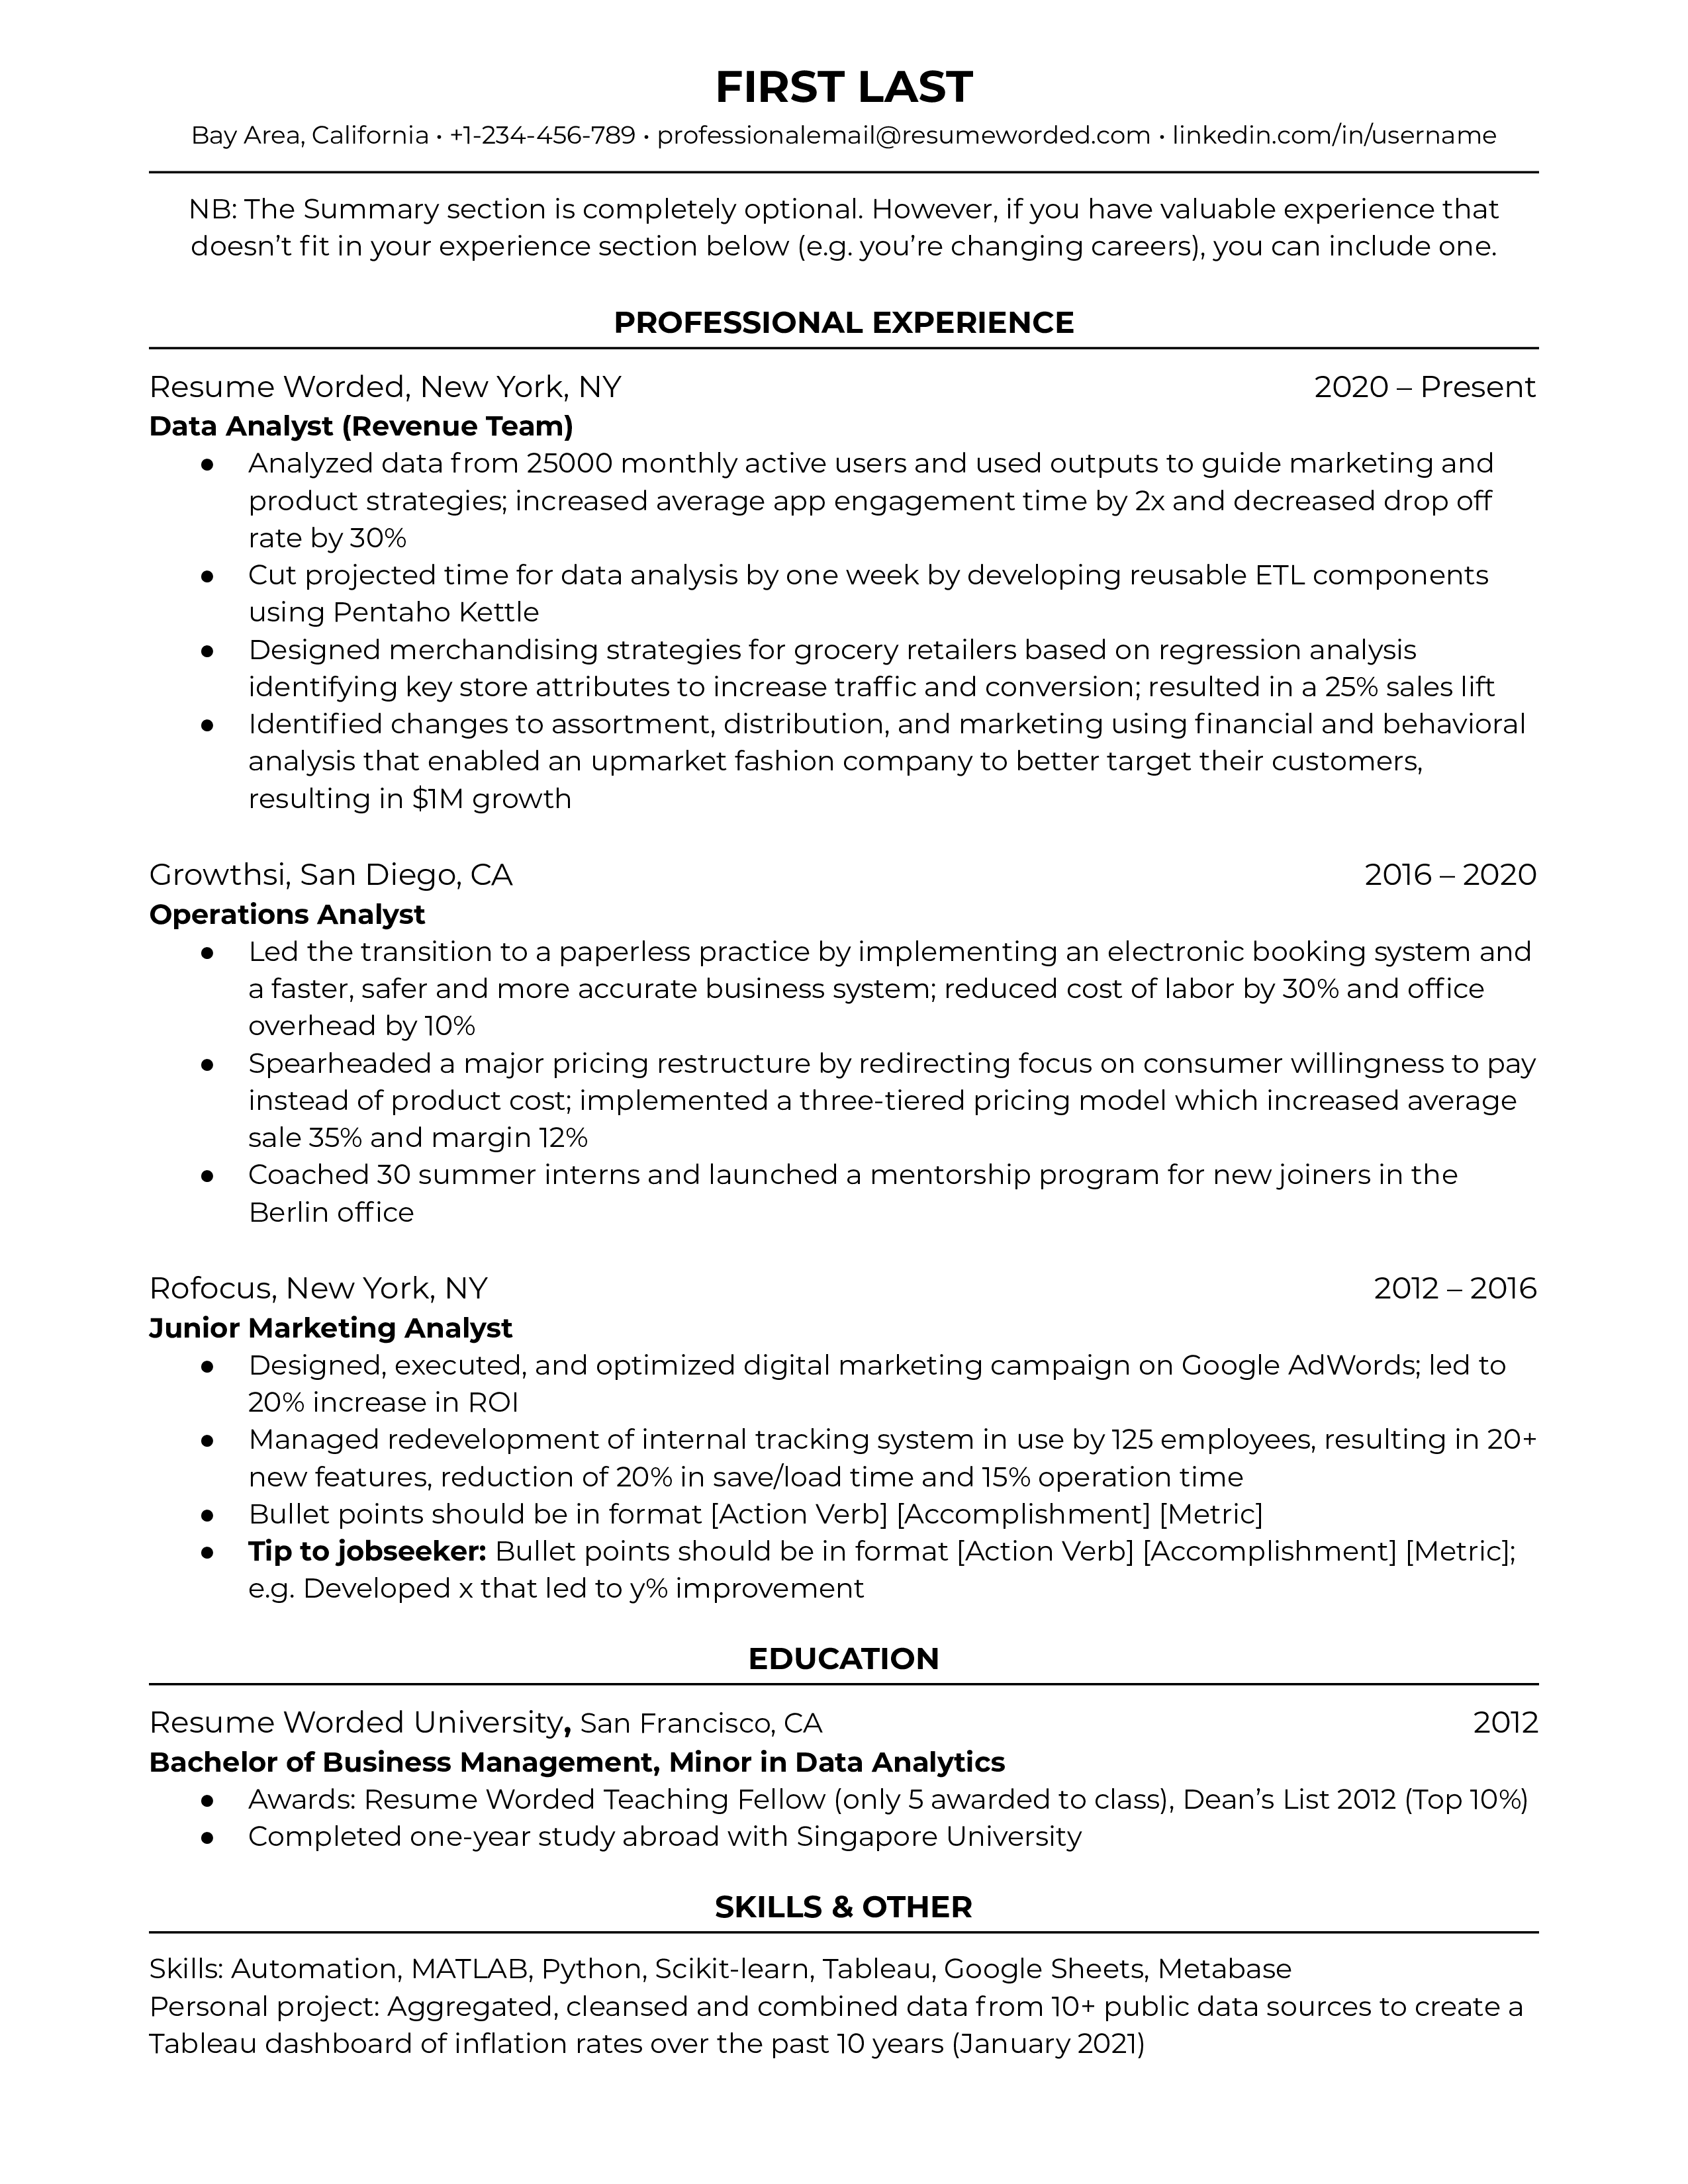 Data Analyst CV highlighting technical proficiency and impact on business outcomes.